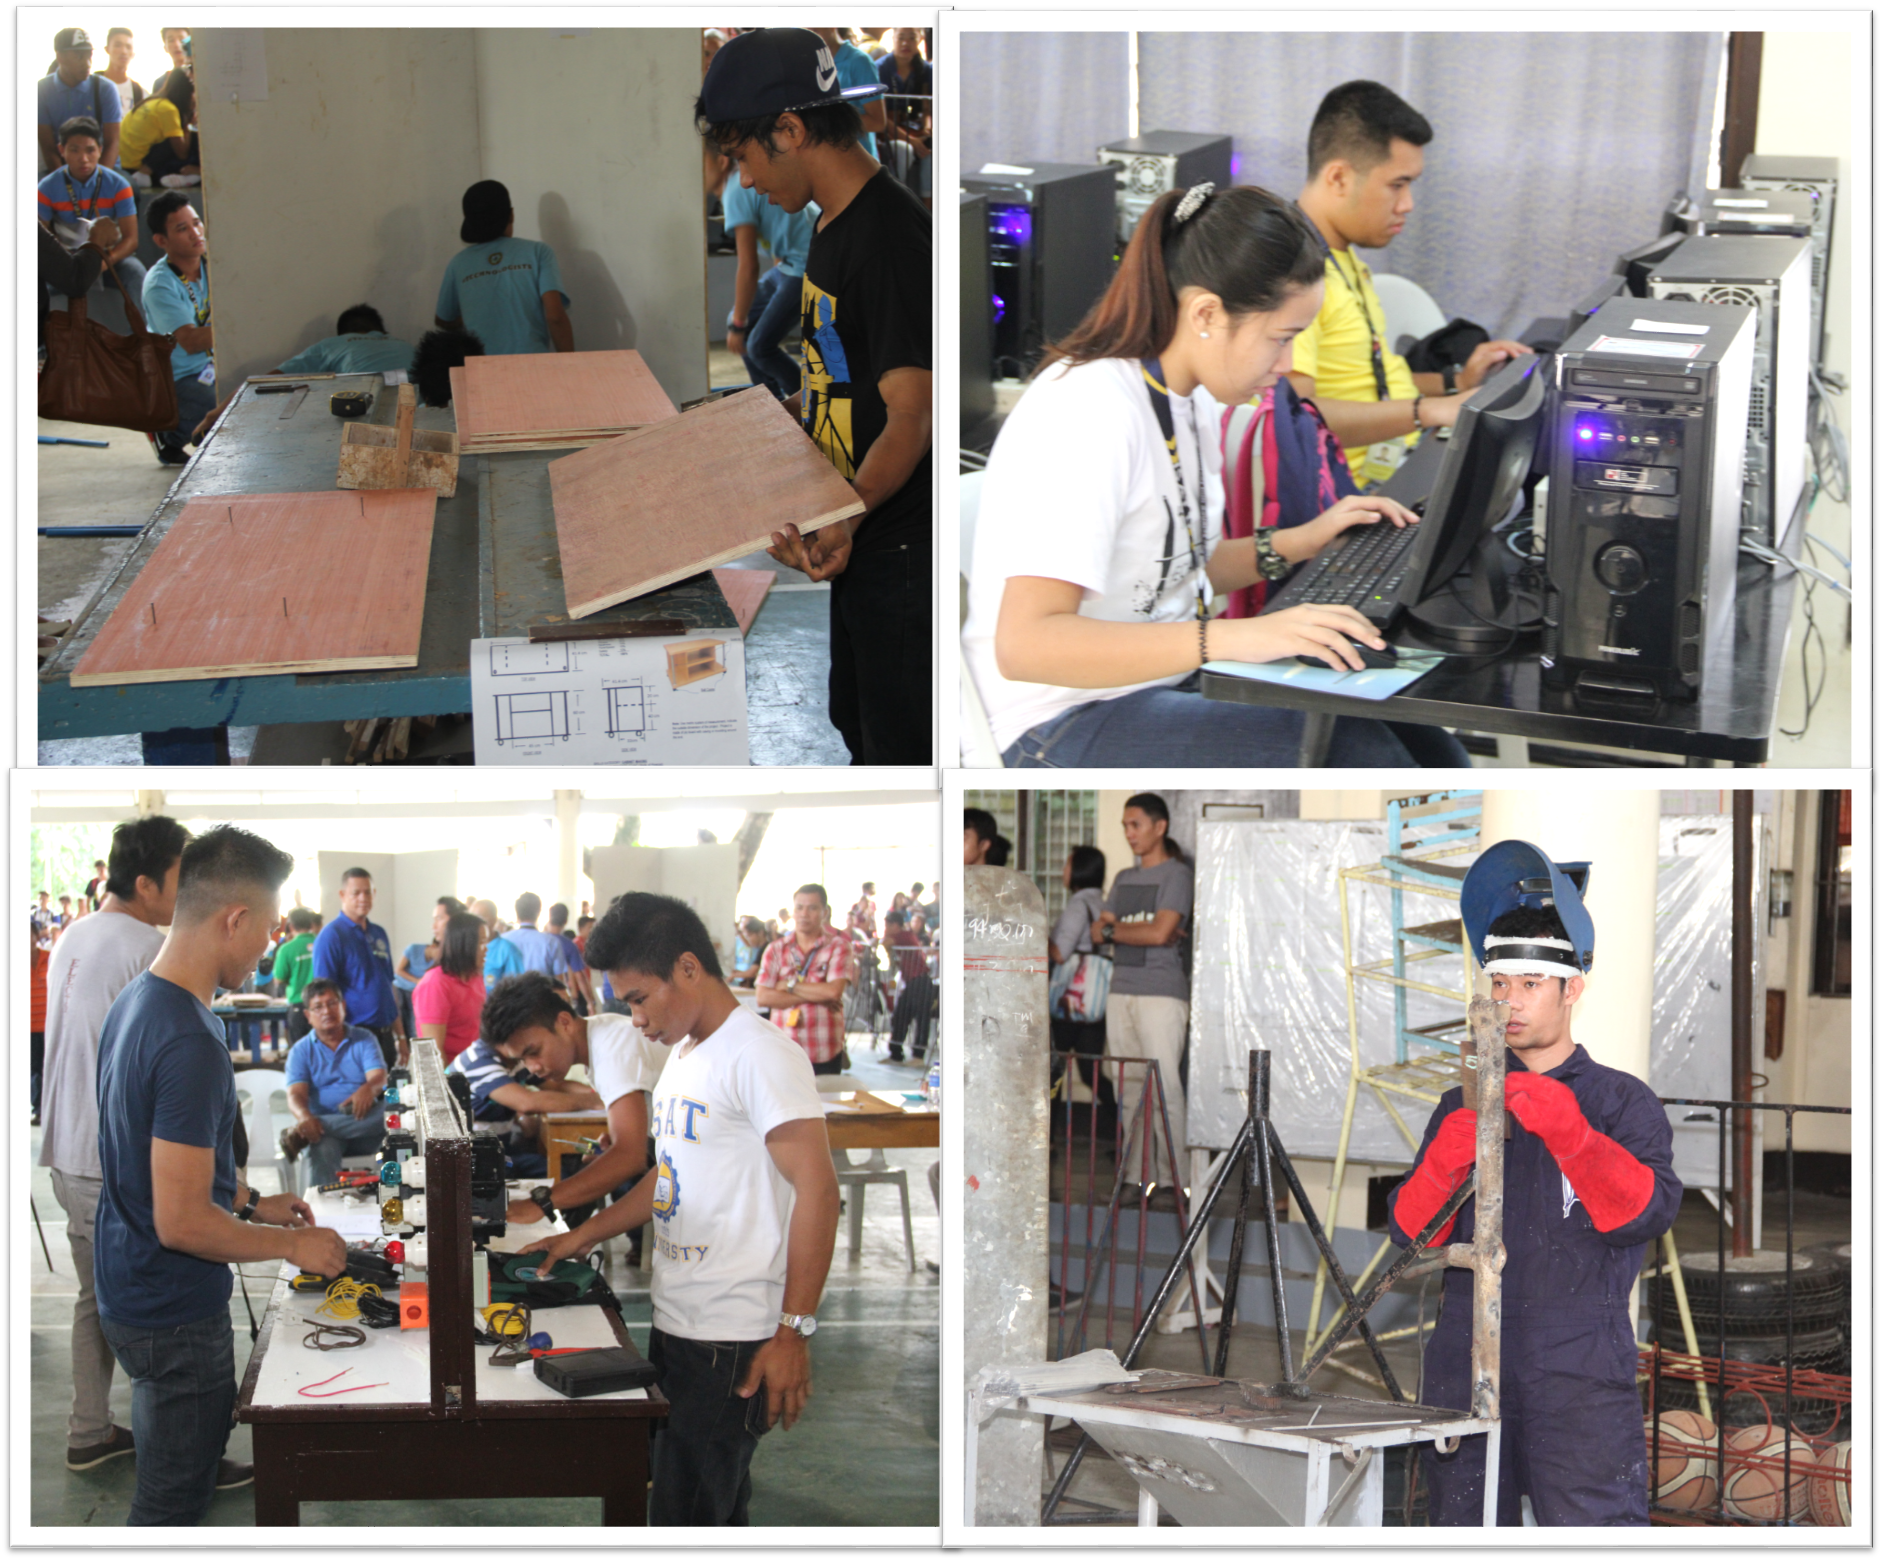 Clockwise, cabinet making, computer programming welding and electronic skills., 